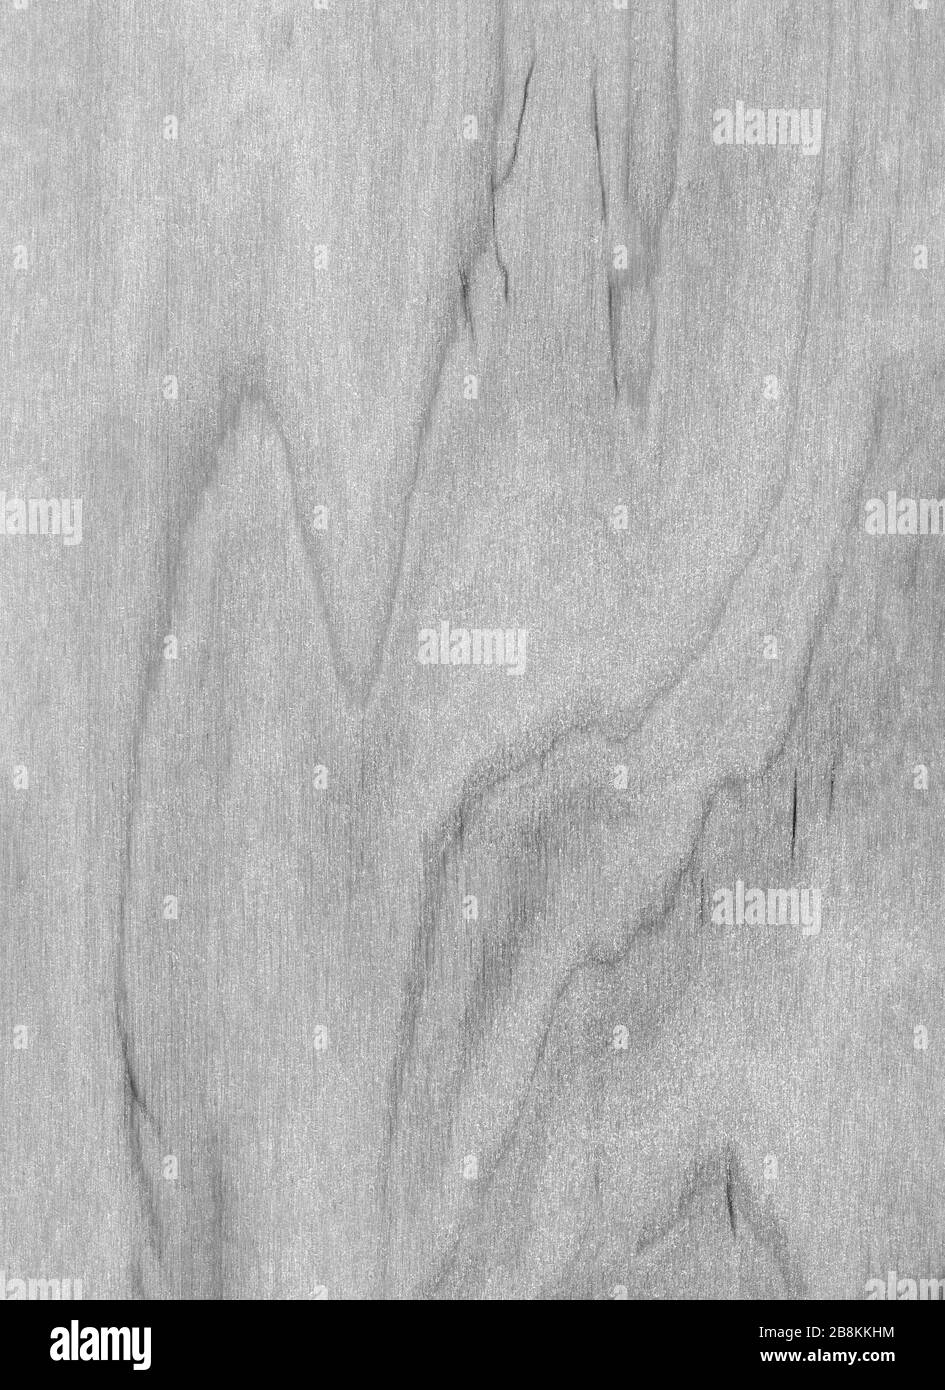 Abstract monochrome wooden background. Black and white varnished wood texture in grunge style. Close-up, top view, natural material of gray color. Stock Photo